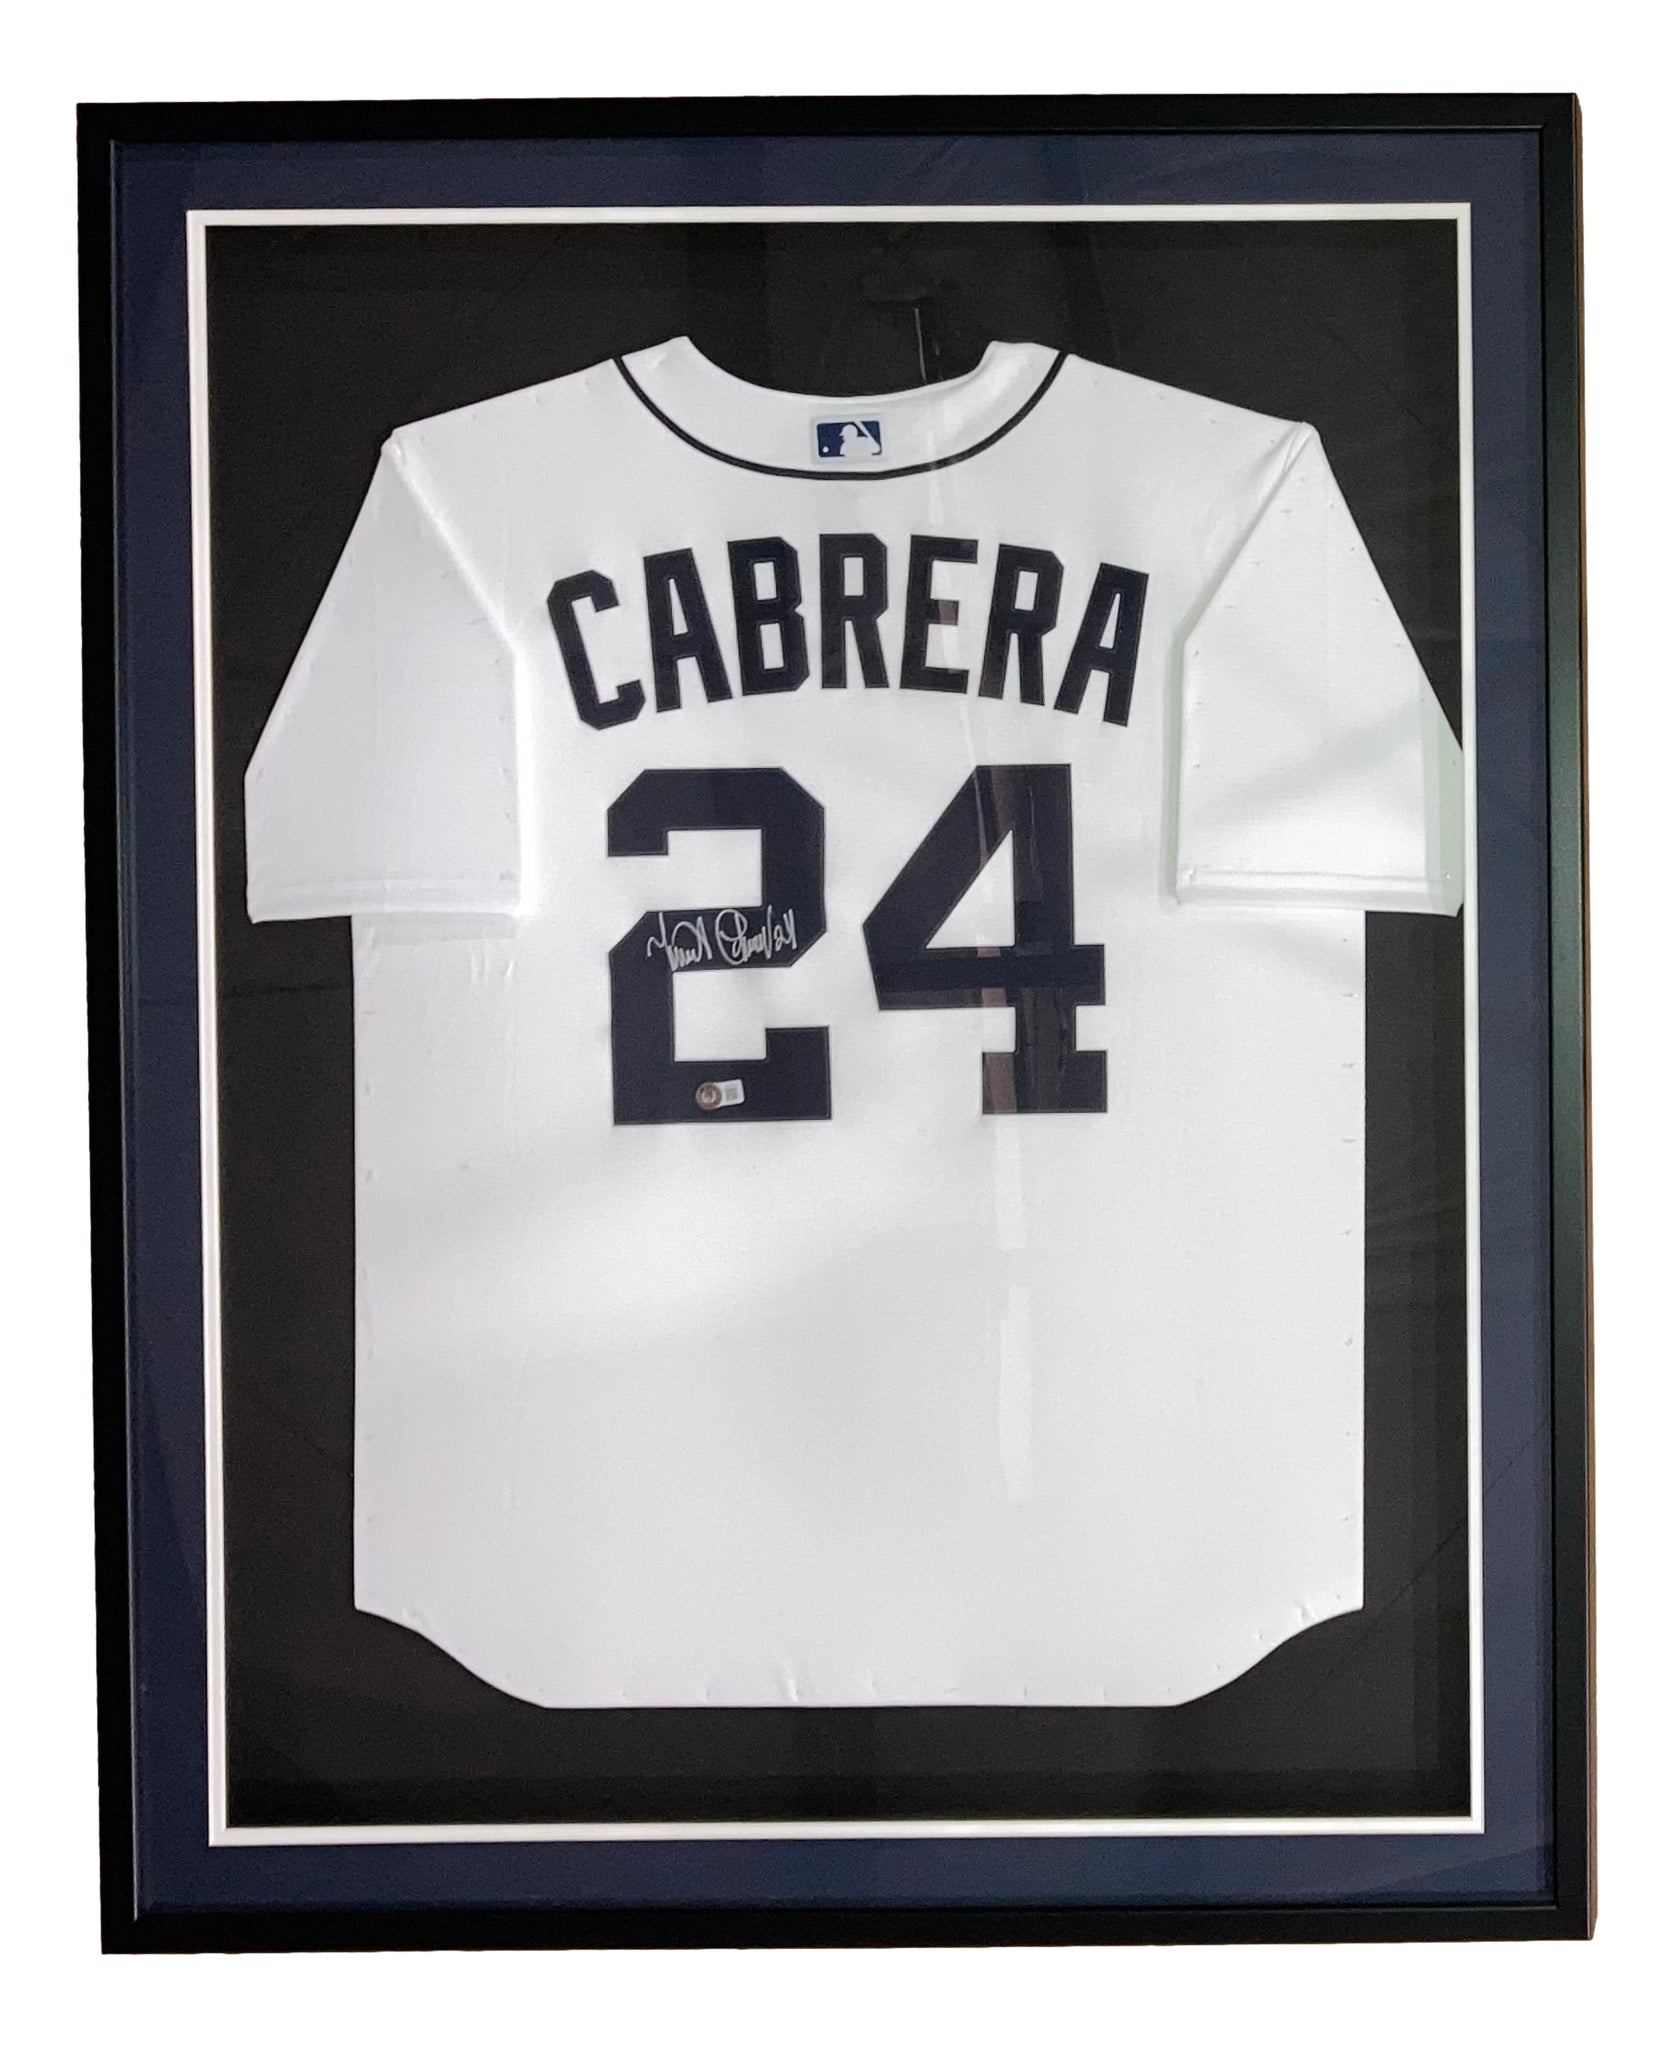 Miguel Cabrera Signed Framed Detroit Tigers White Nike Baseball Jersey